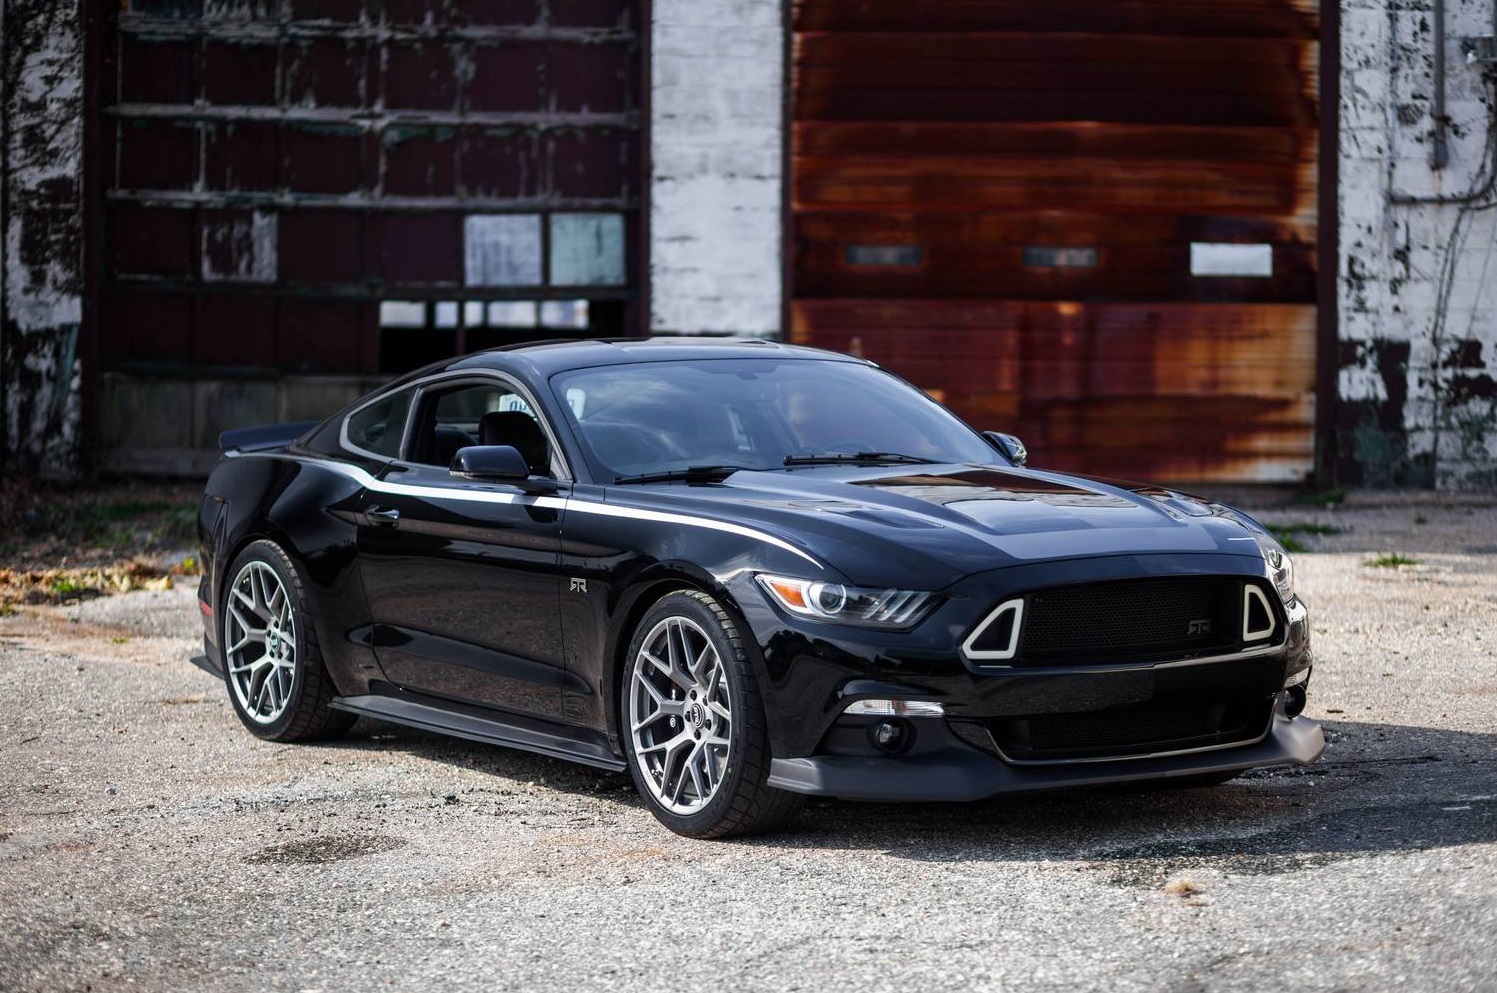 official-2015-mustang-rtr-3